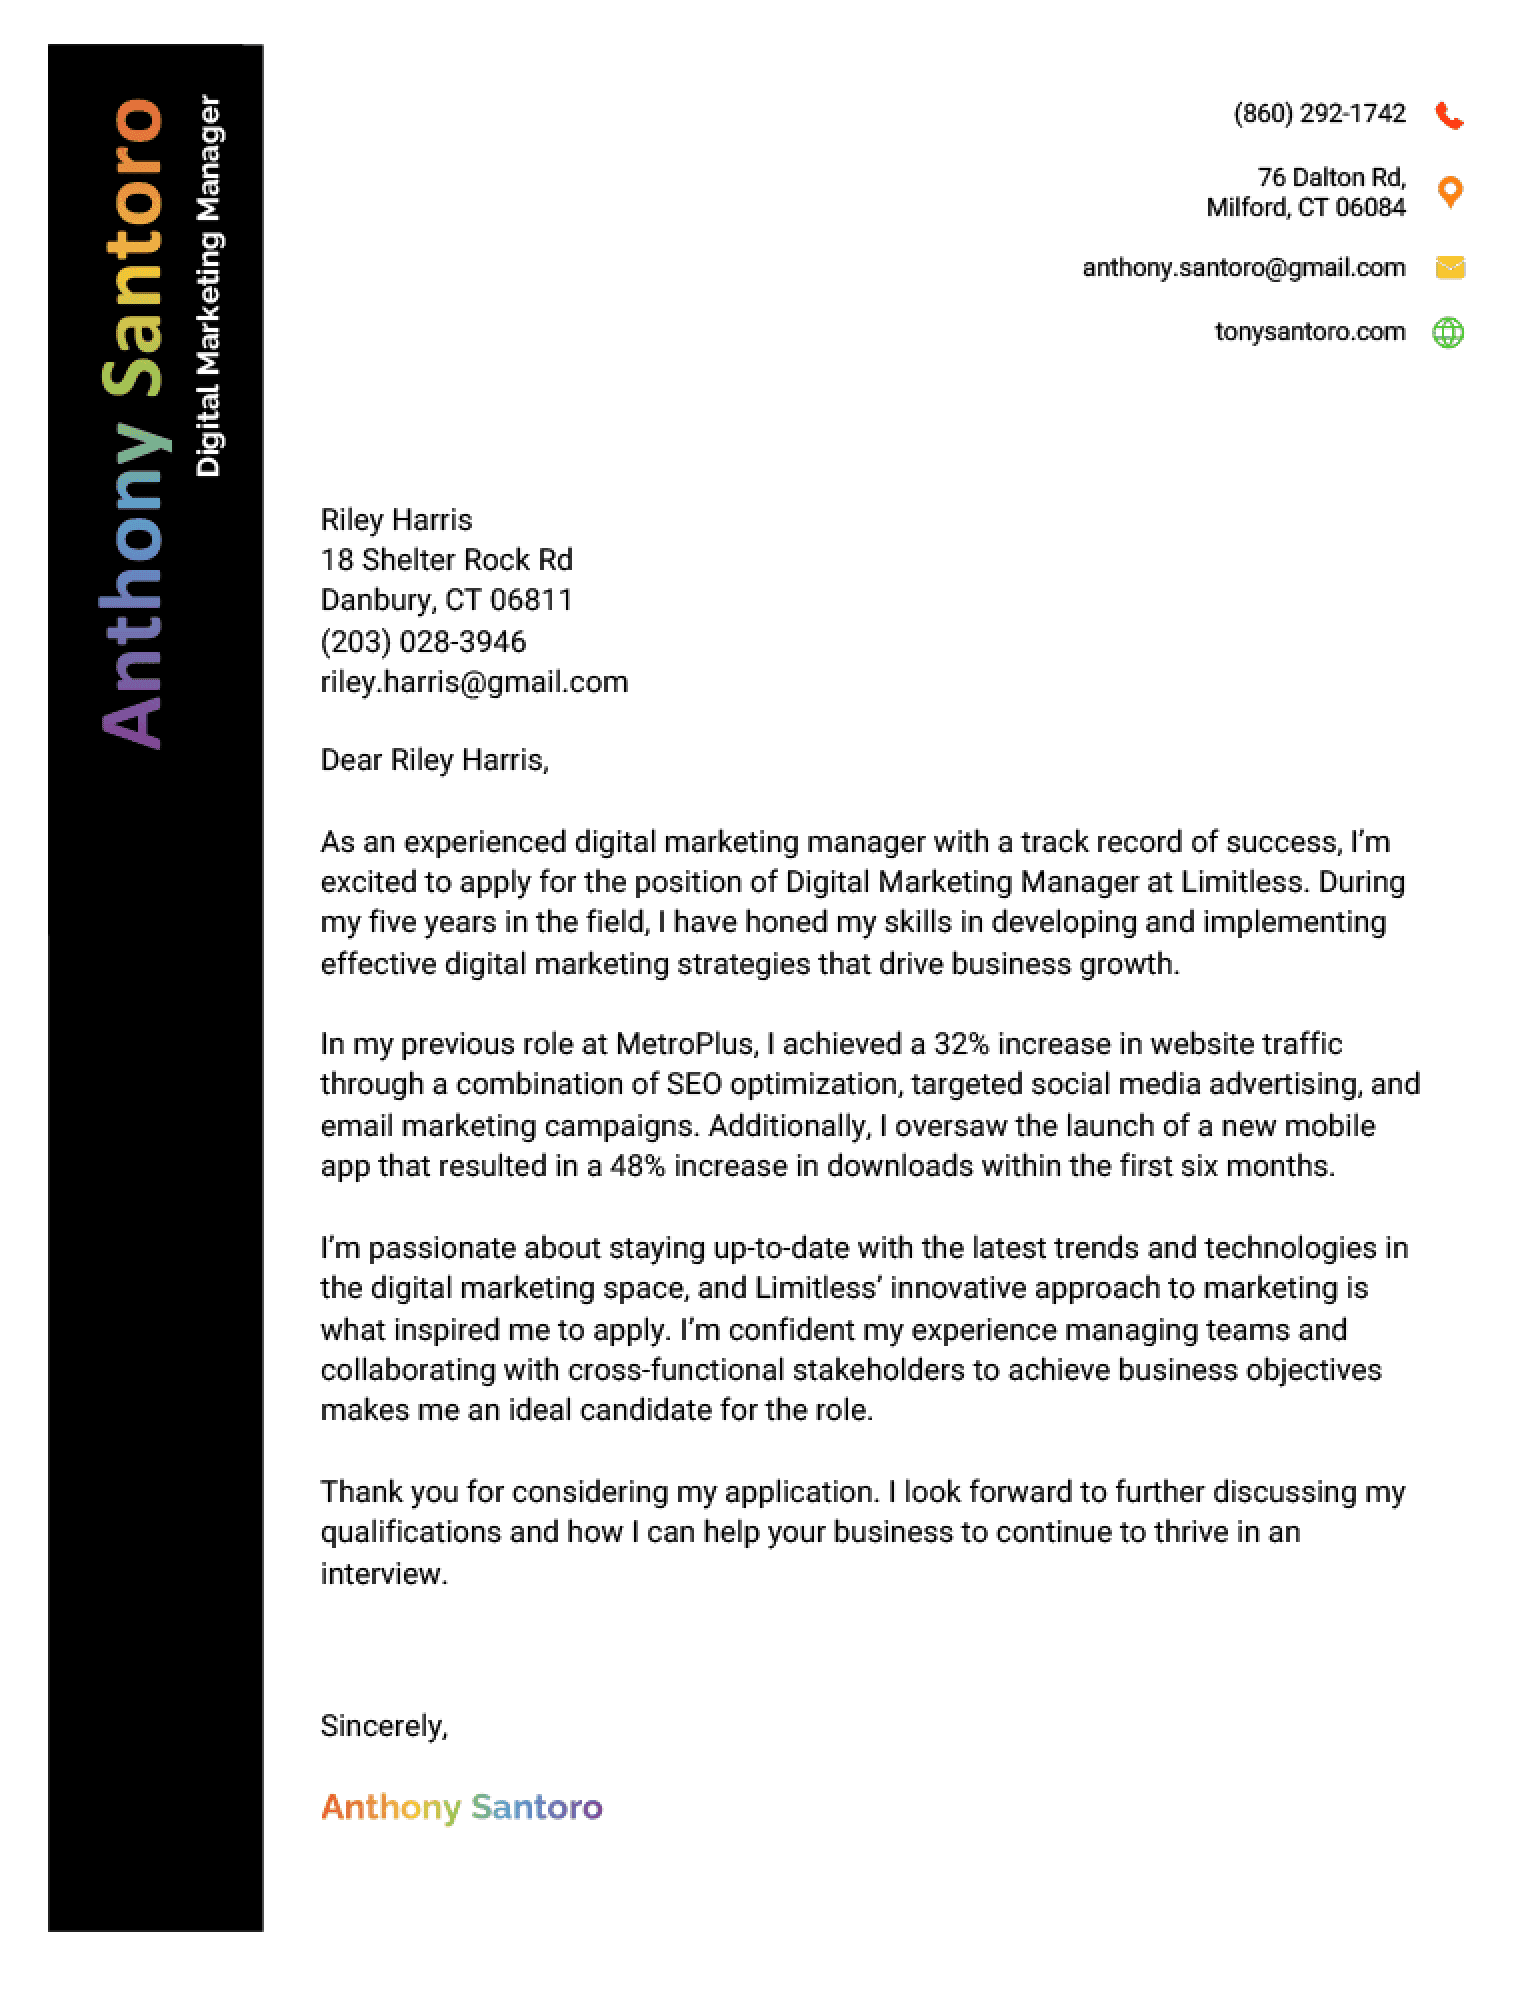 A cover letter example using a creative template with a black header and rainbow text.